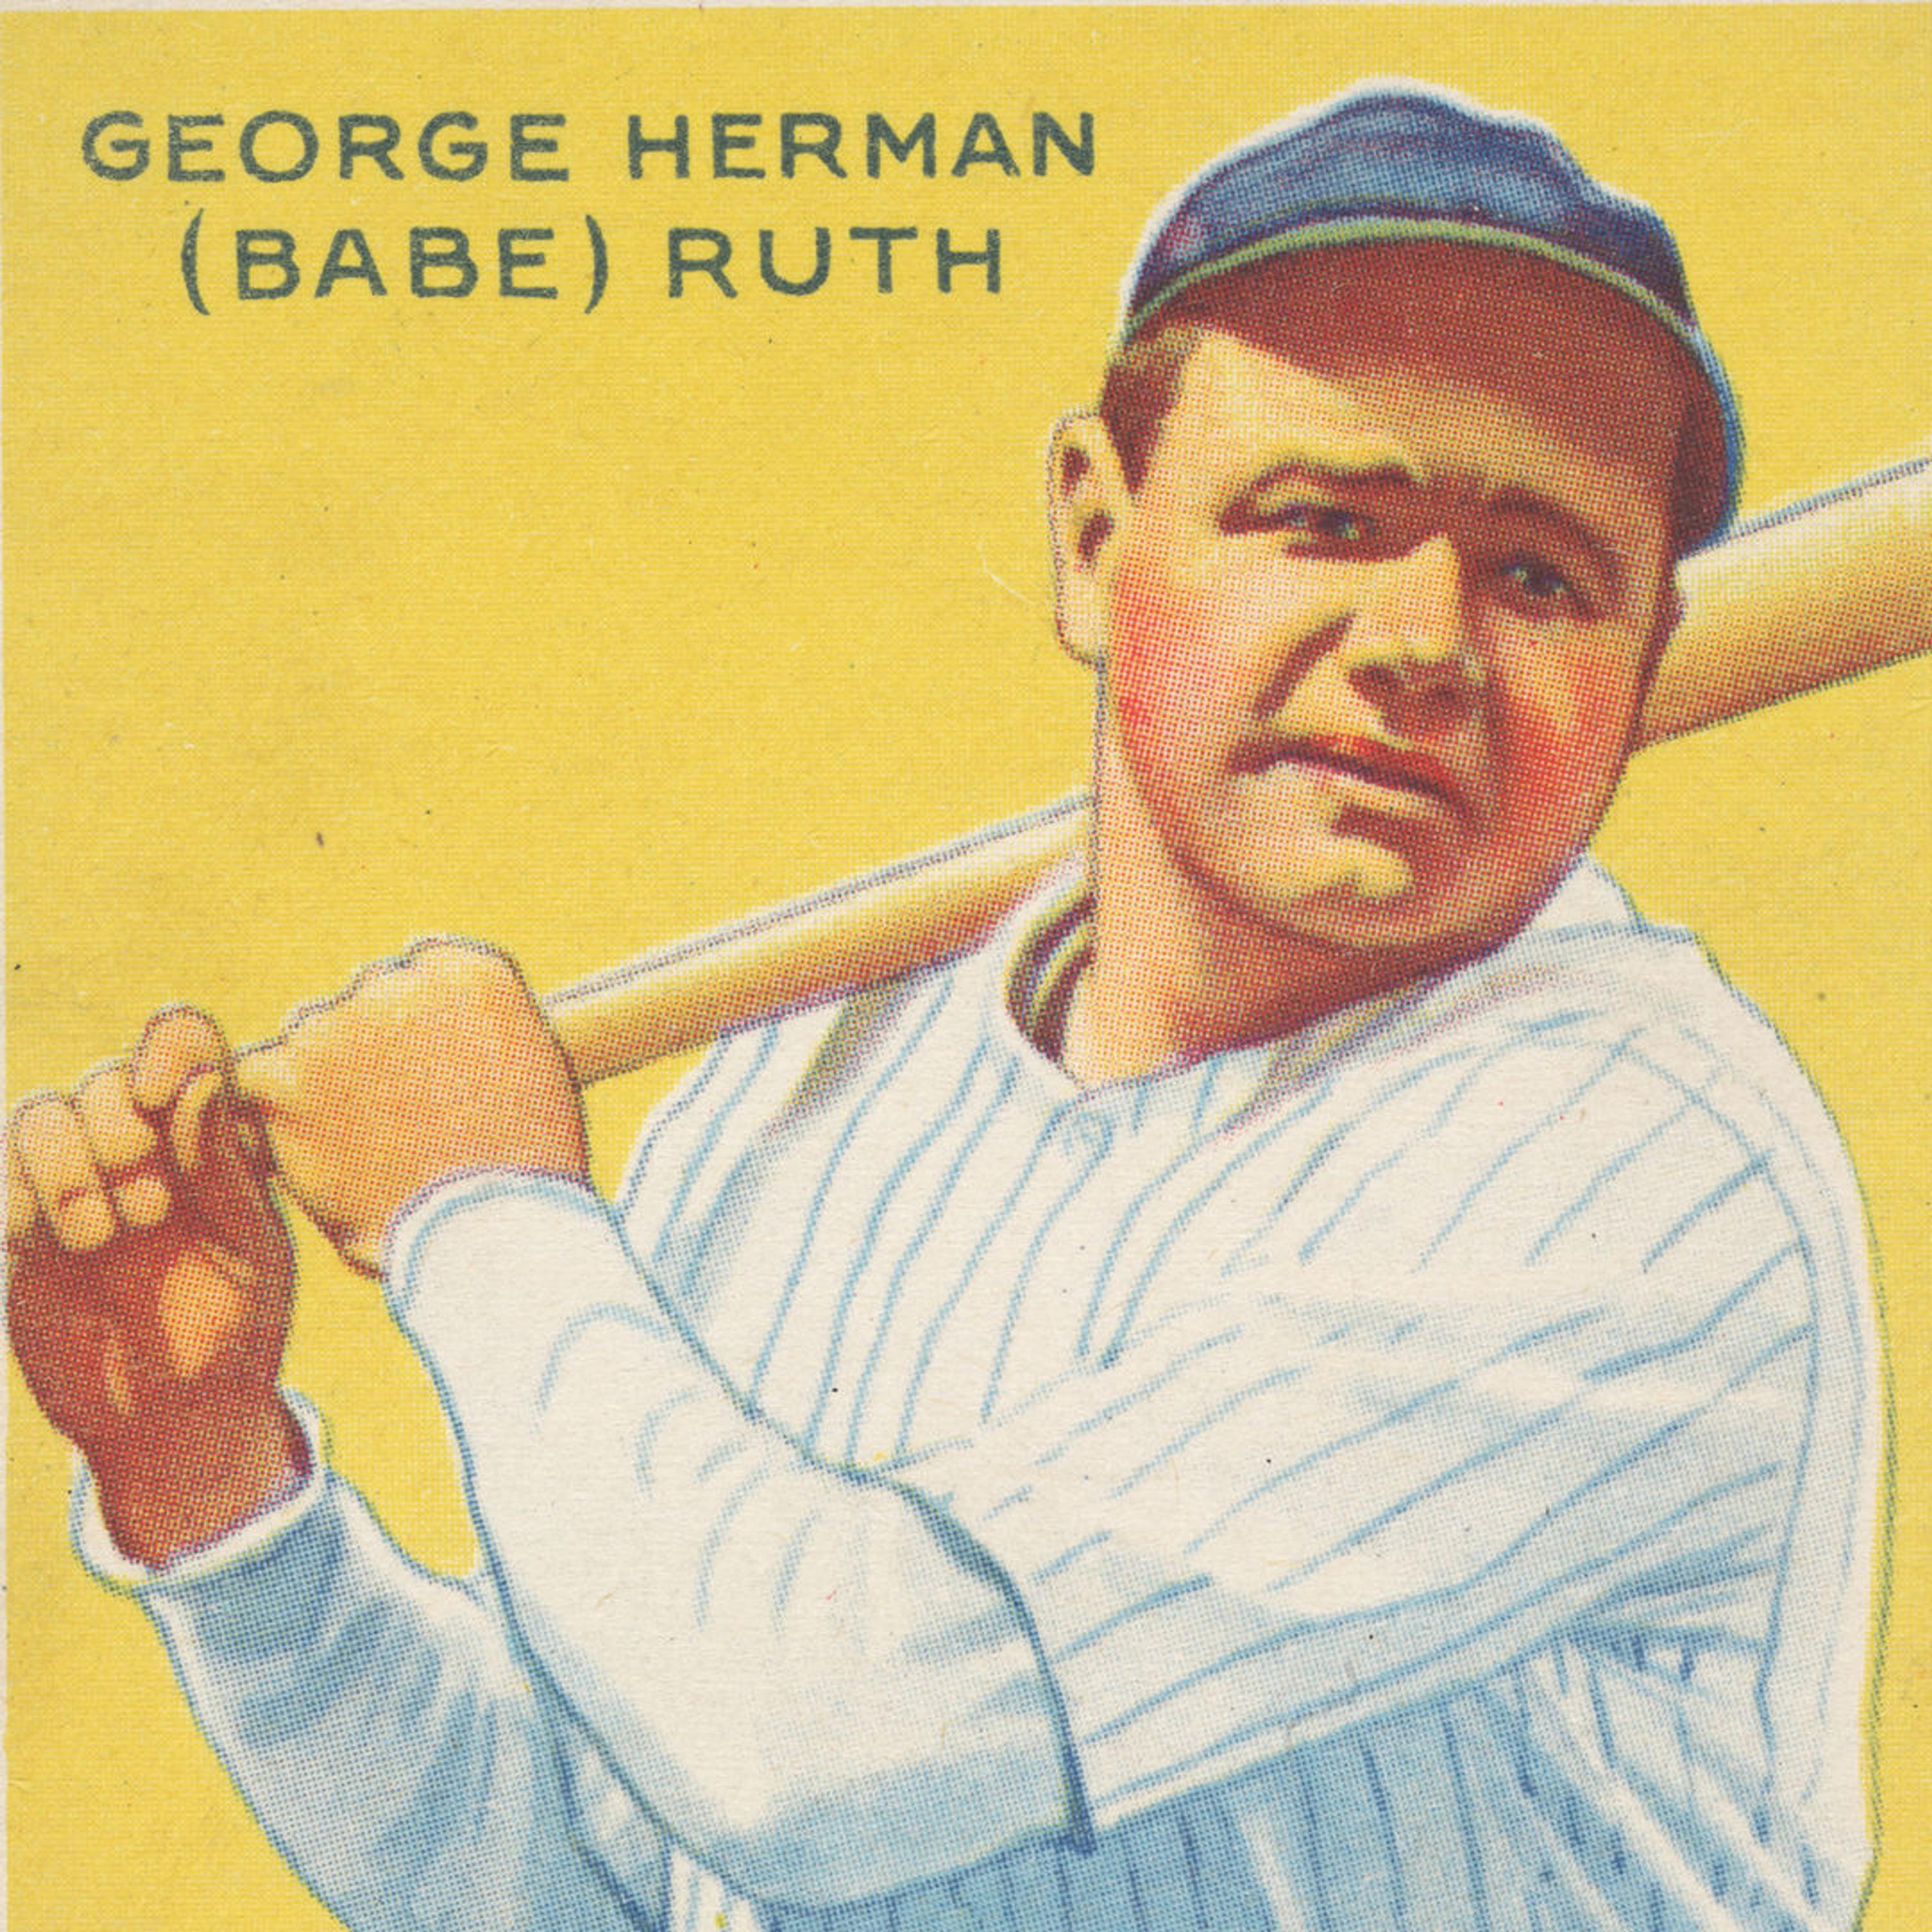 Babe Ruth is an Atlanta Brave on a baseball card? It must be a